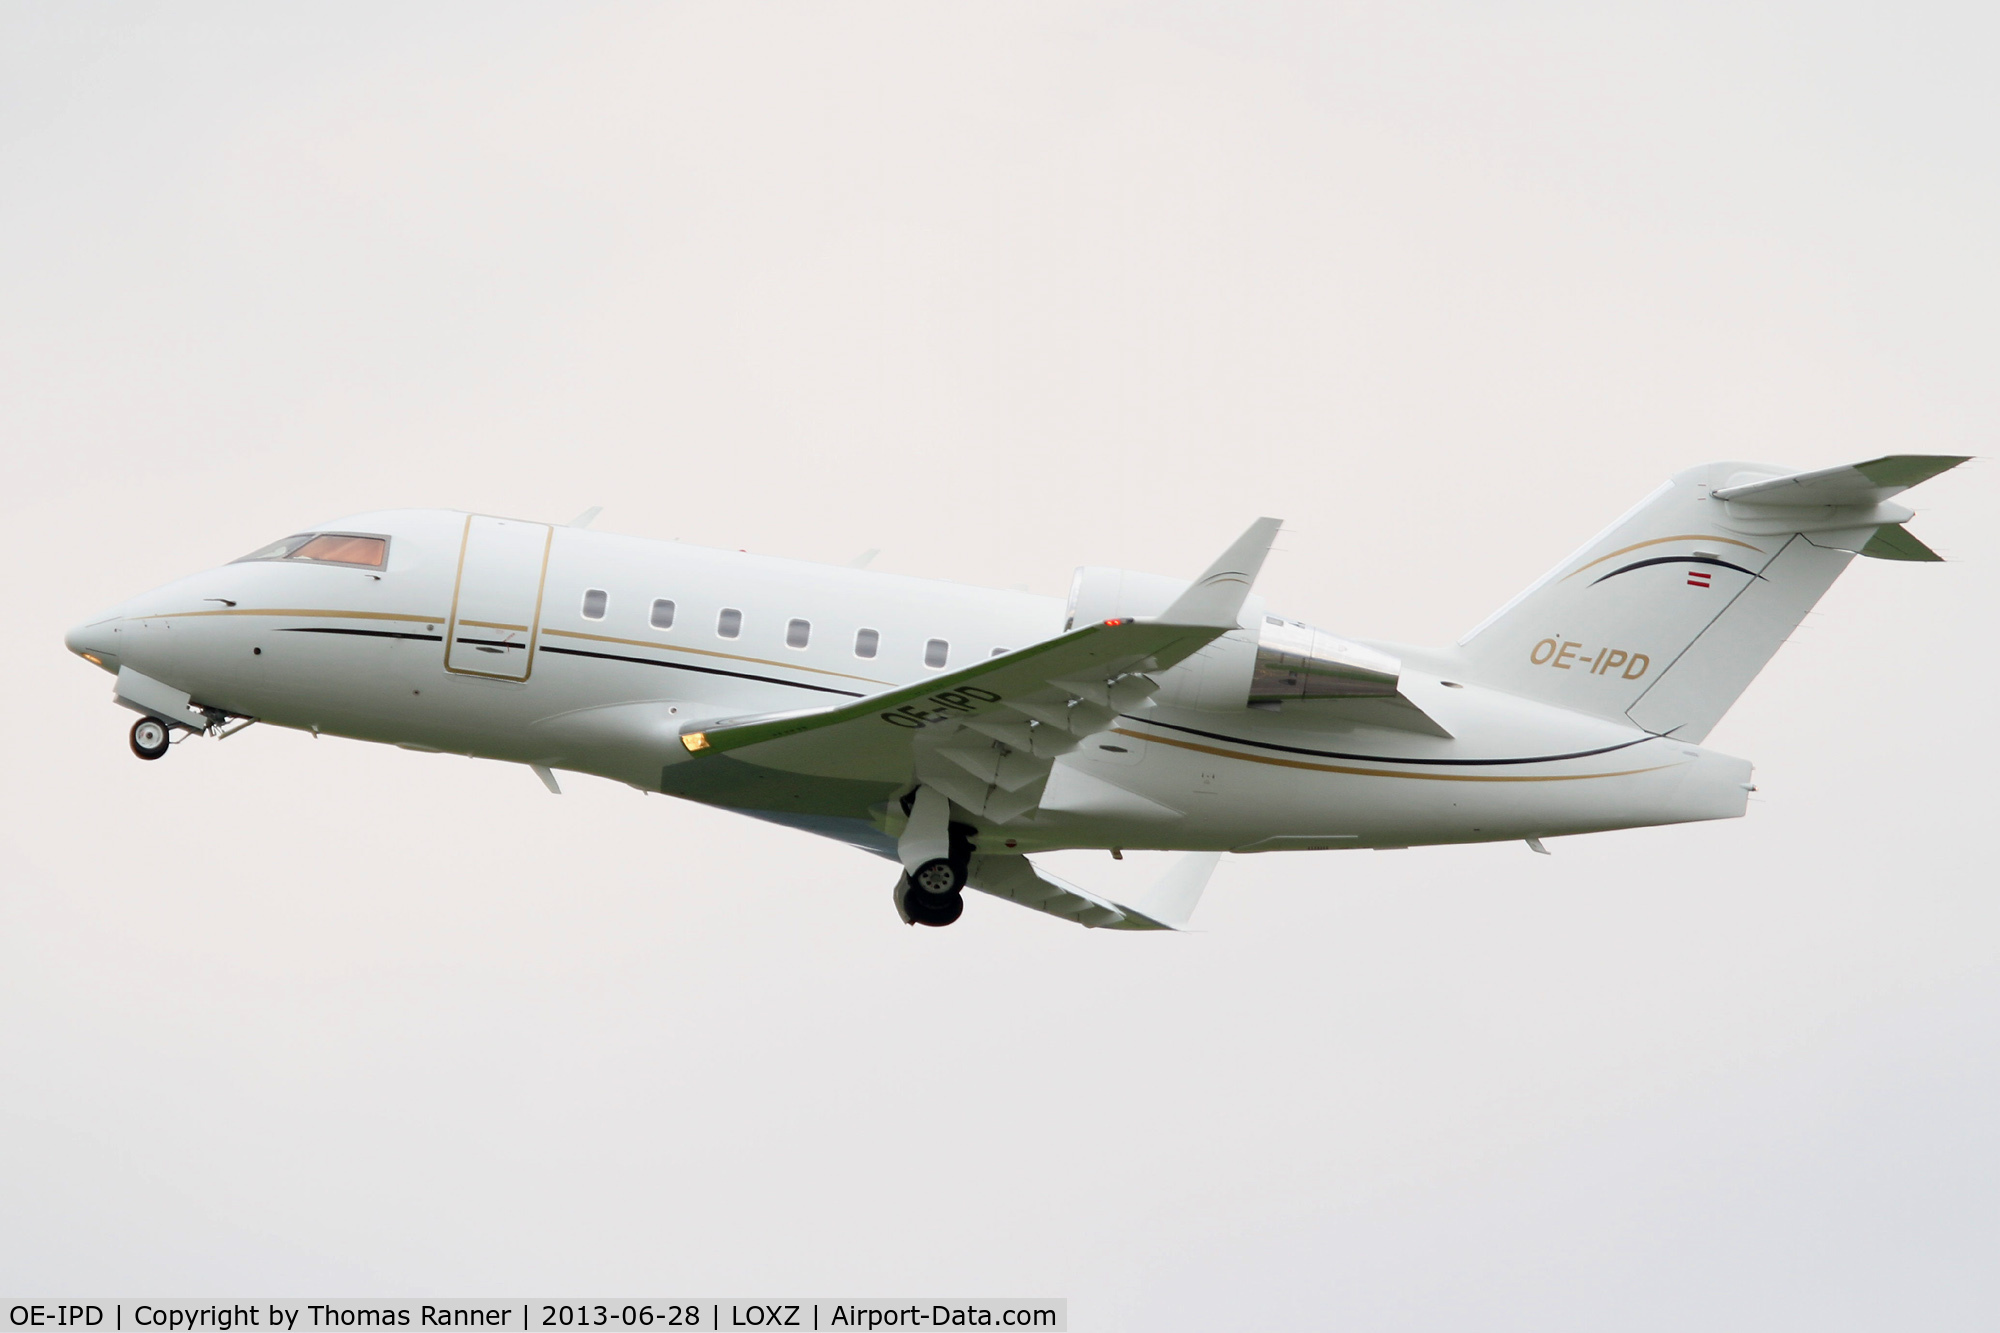 OE-IPD, 2005 Bombardier Challenger 604 (CL-600-2B16) C/N 5608, Challenger 604